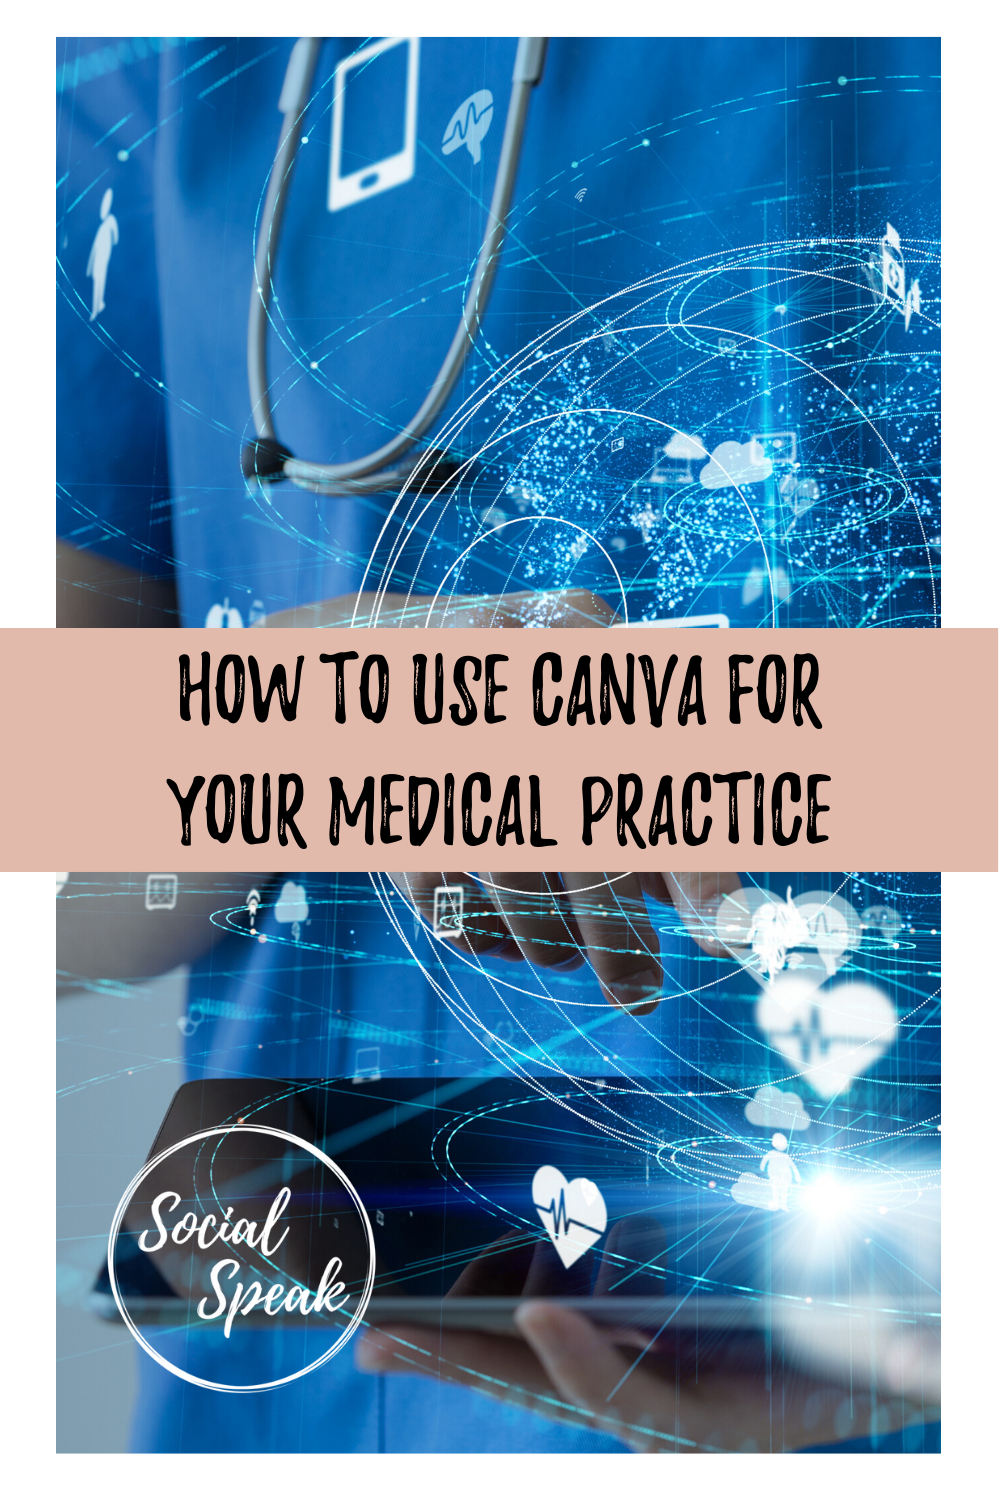 How to Use Canva for Your Medical Practice